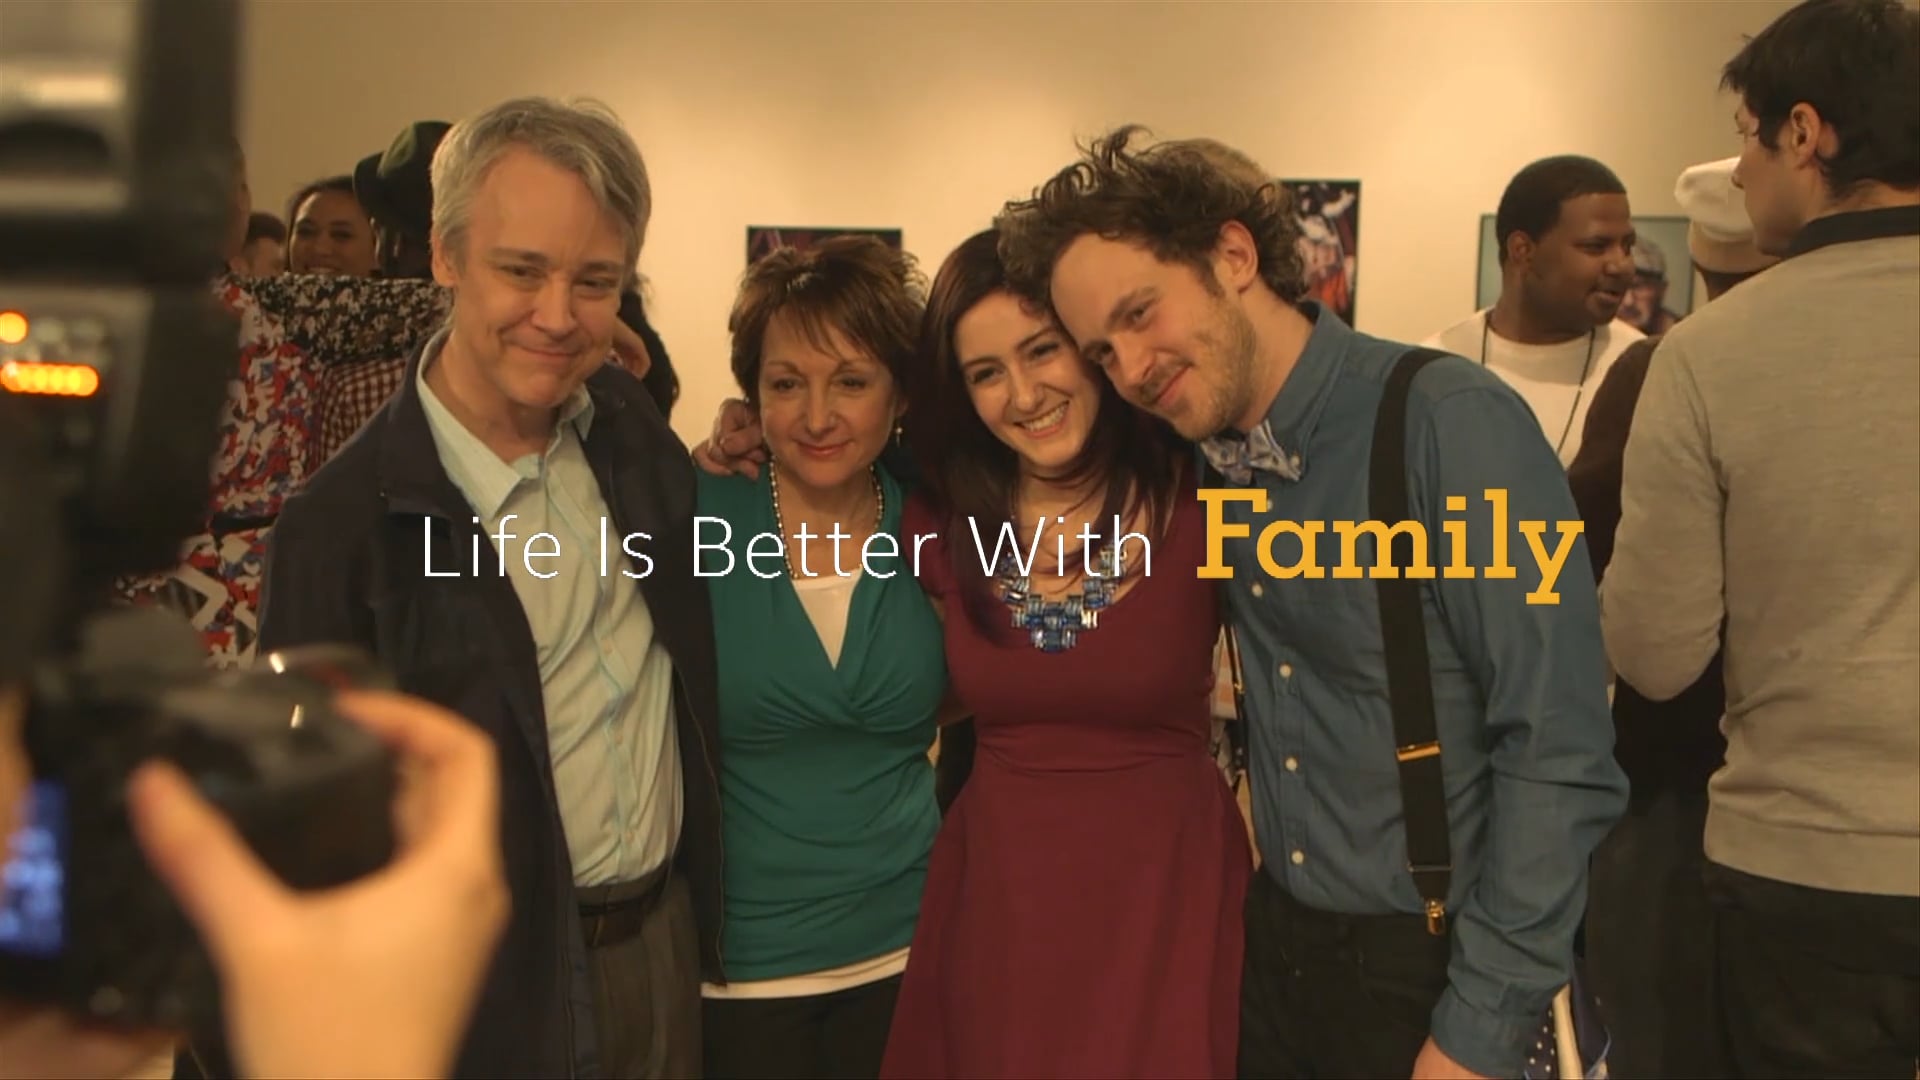 INTEL_LIFE_IS_BETTER_FAMILY_FINAL_1